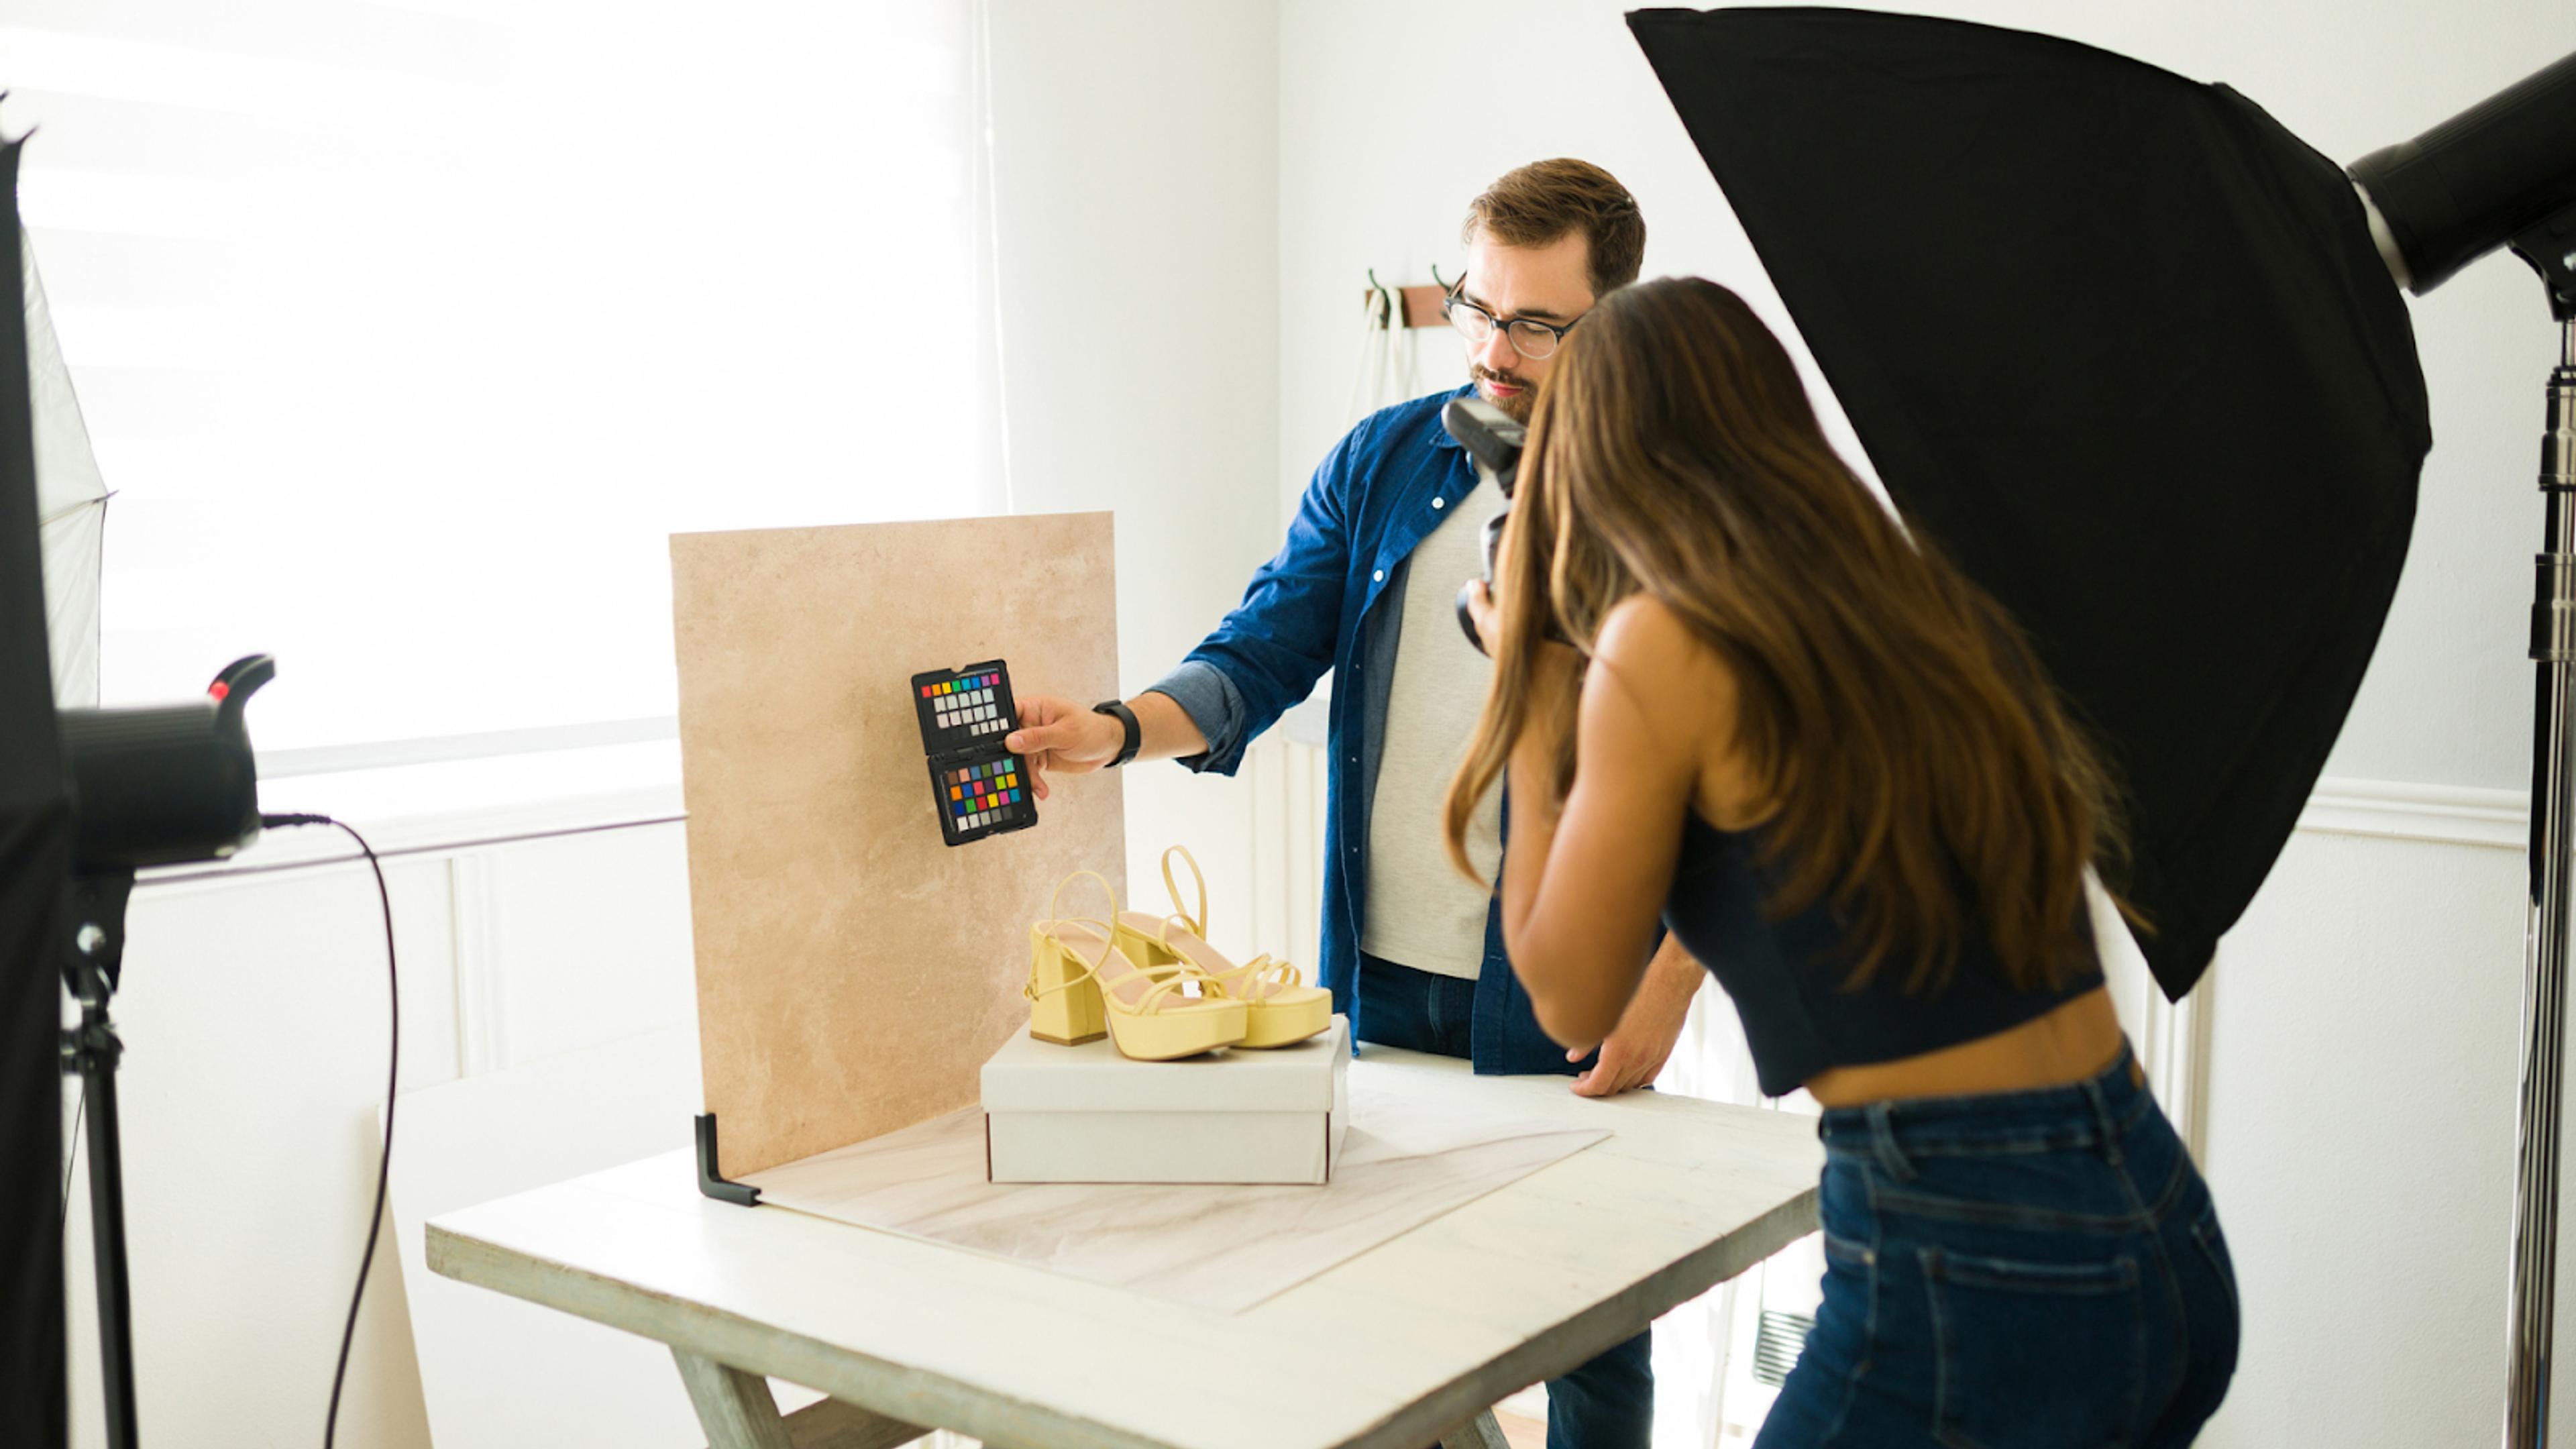 Best Practices For Product Photography